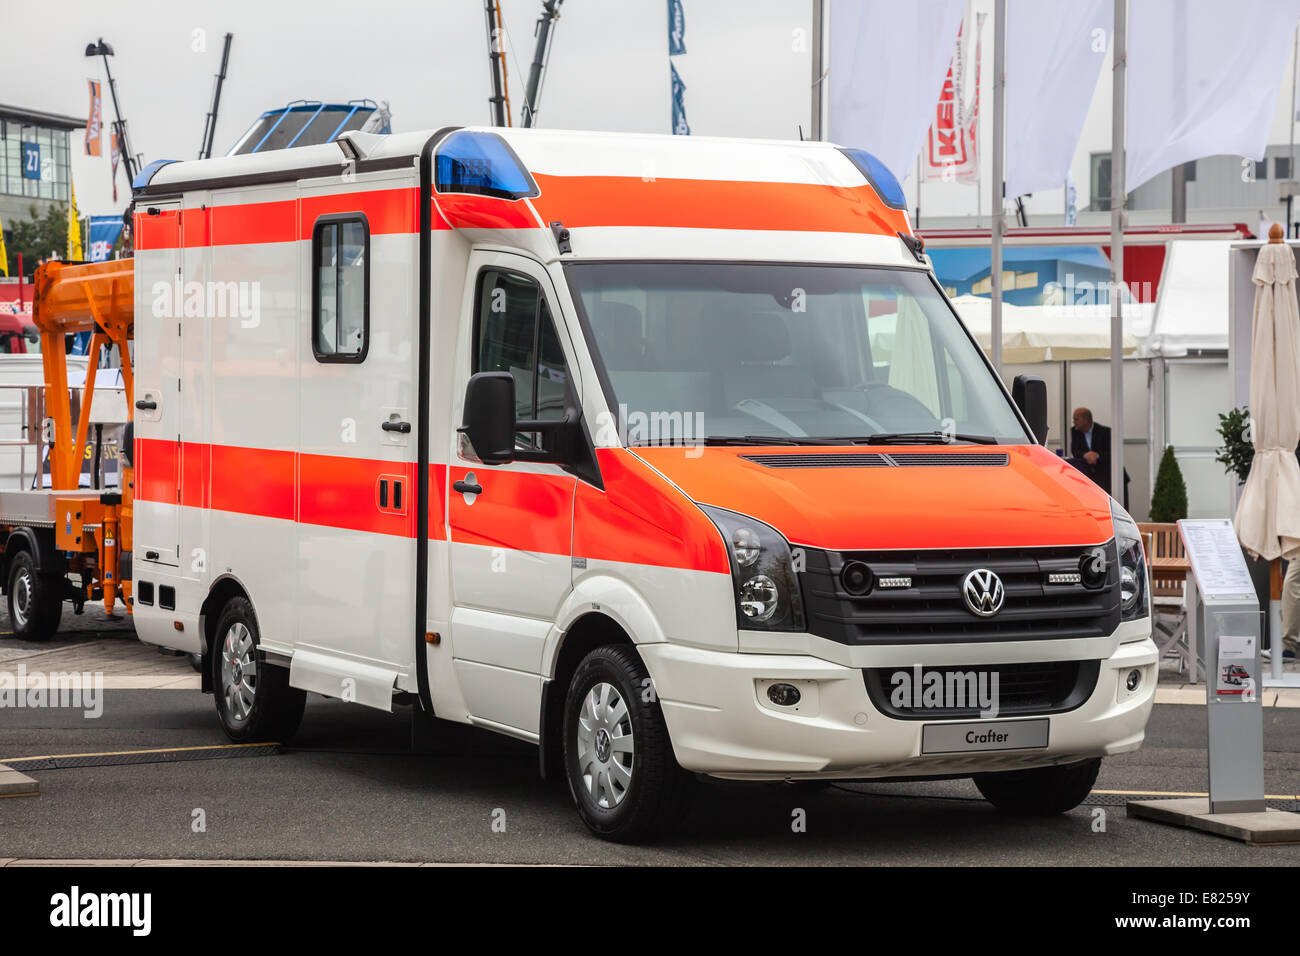 VW Crafter Ambulance Van at the 65th IAA Commercial Vehicles fair 2014 in Hannover, Germany Stock Photo